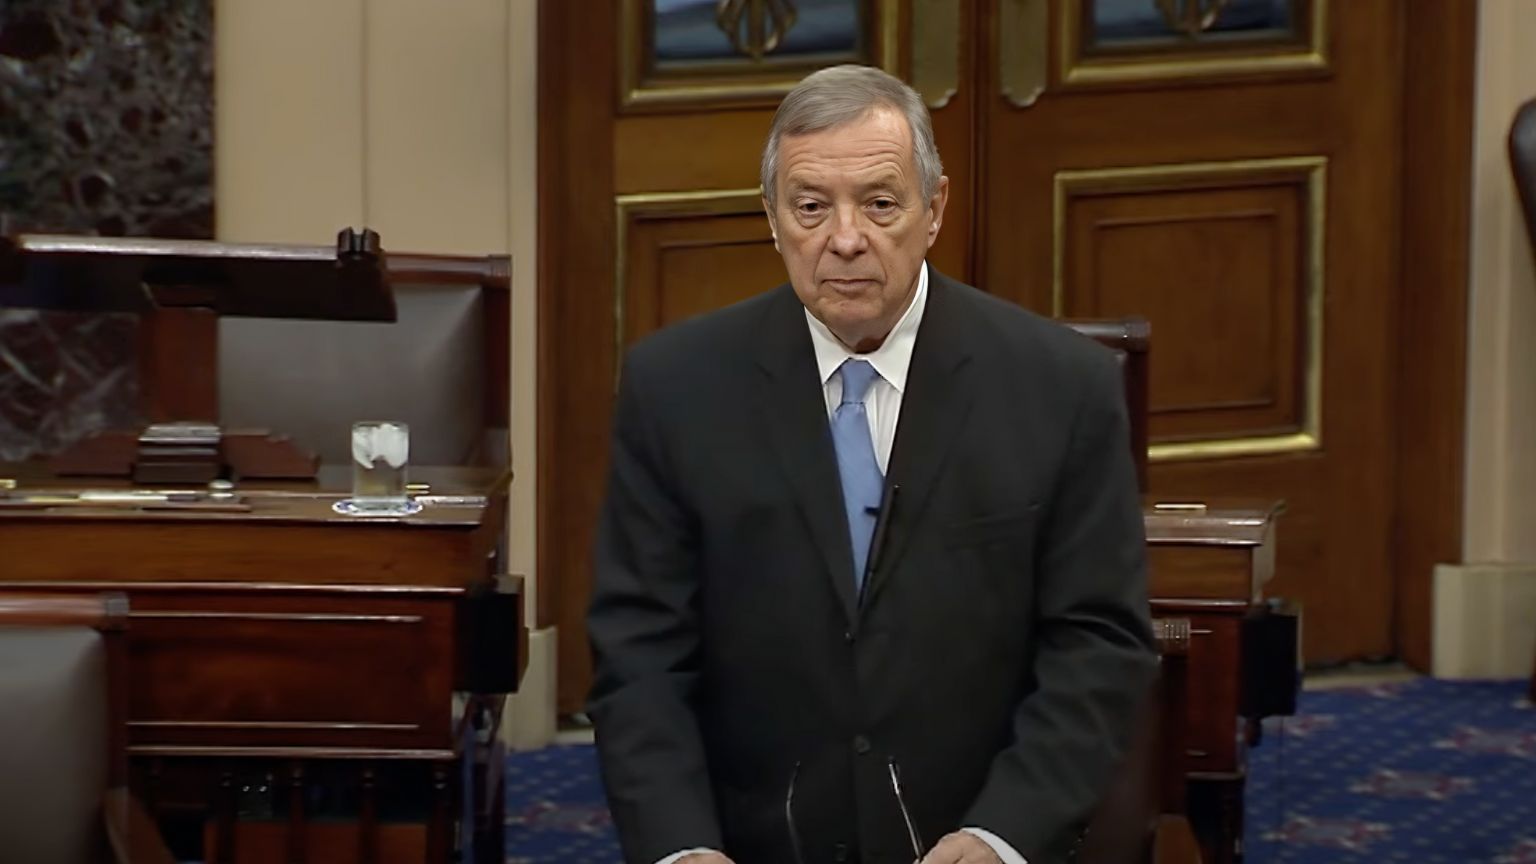 Senator Dick Durbin says free speech doesn’t protect “misinformation” that downplays political violence